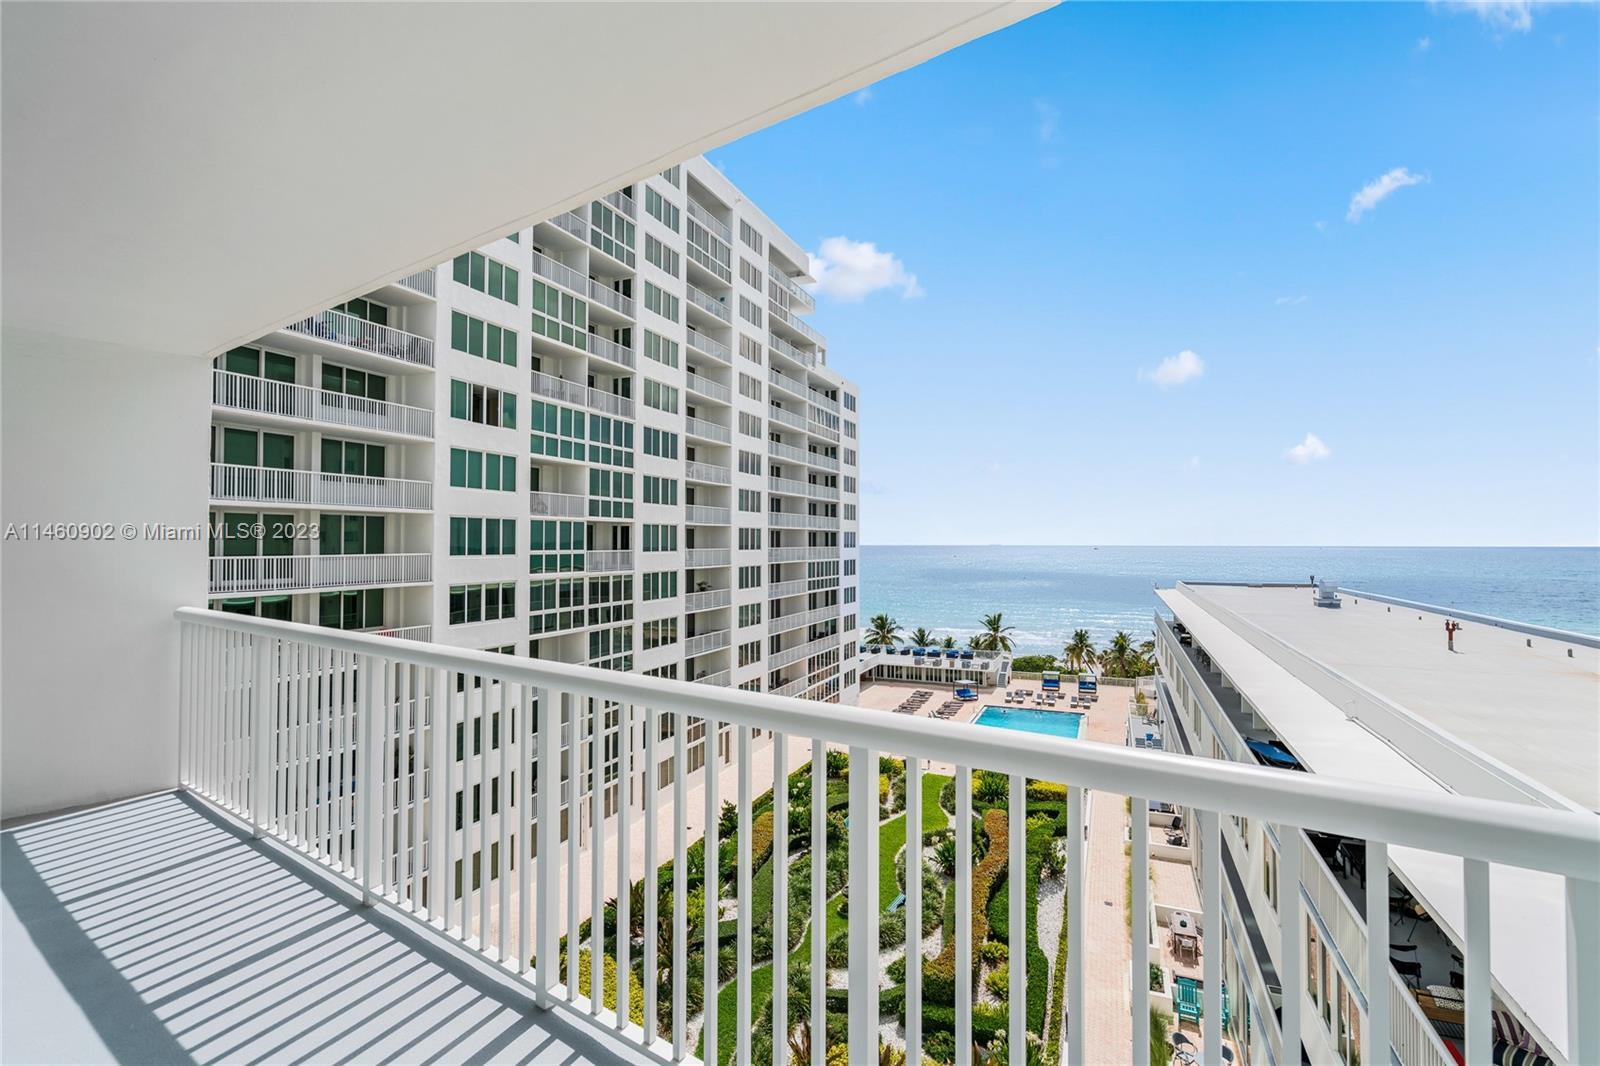 Direct ocean views greet you upon entering this renovated gem. Oversized balcony brings the unit's t